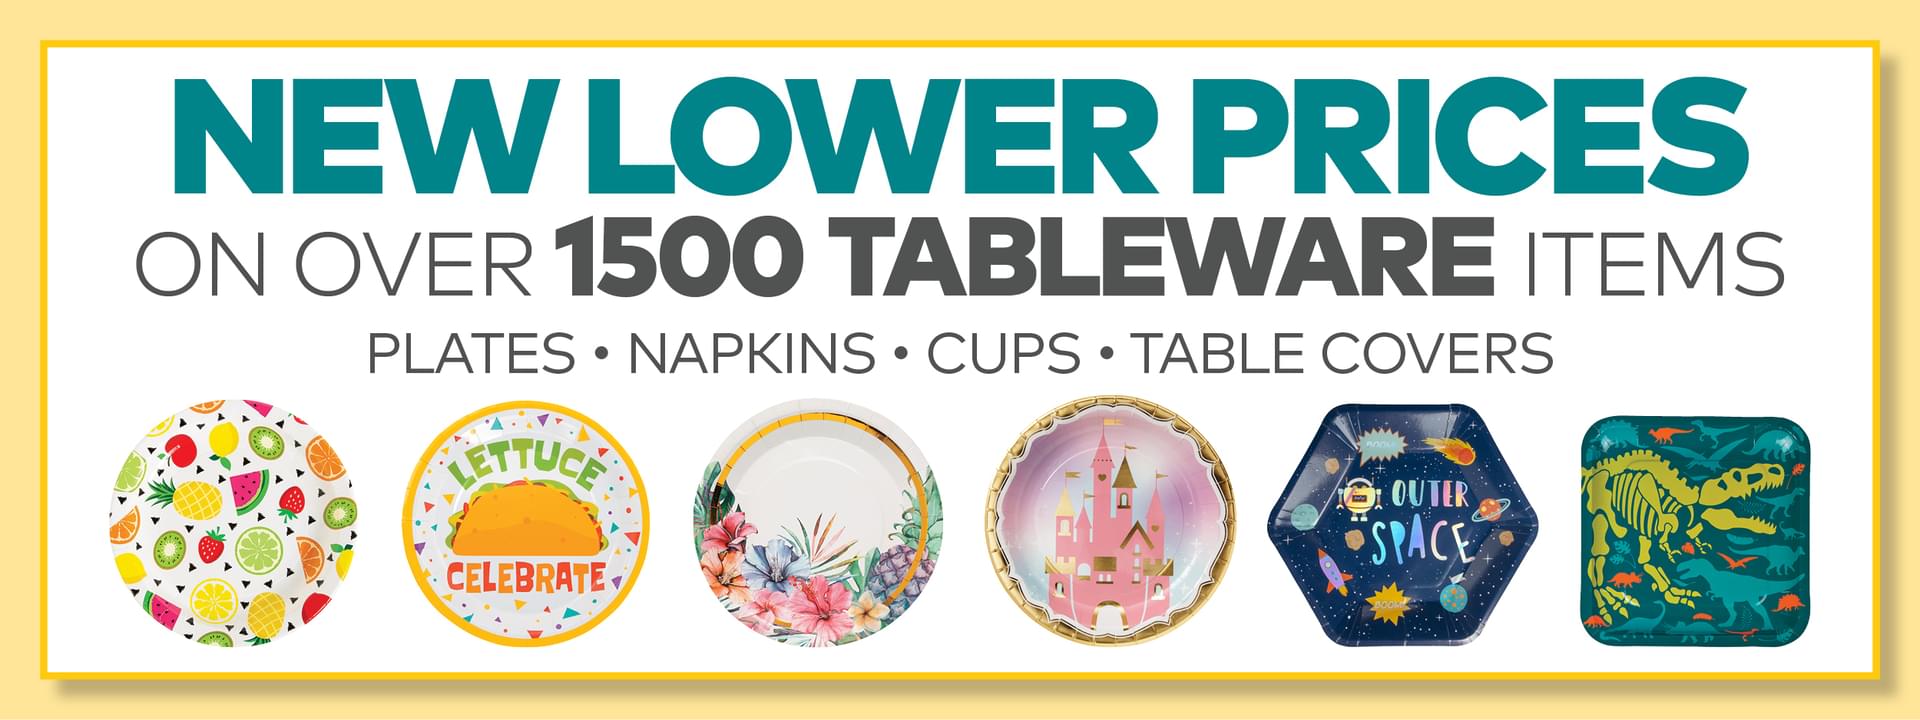 New Lower Prices on Over 1500 Tableware Items!